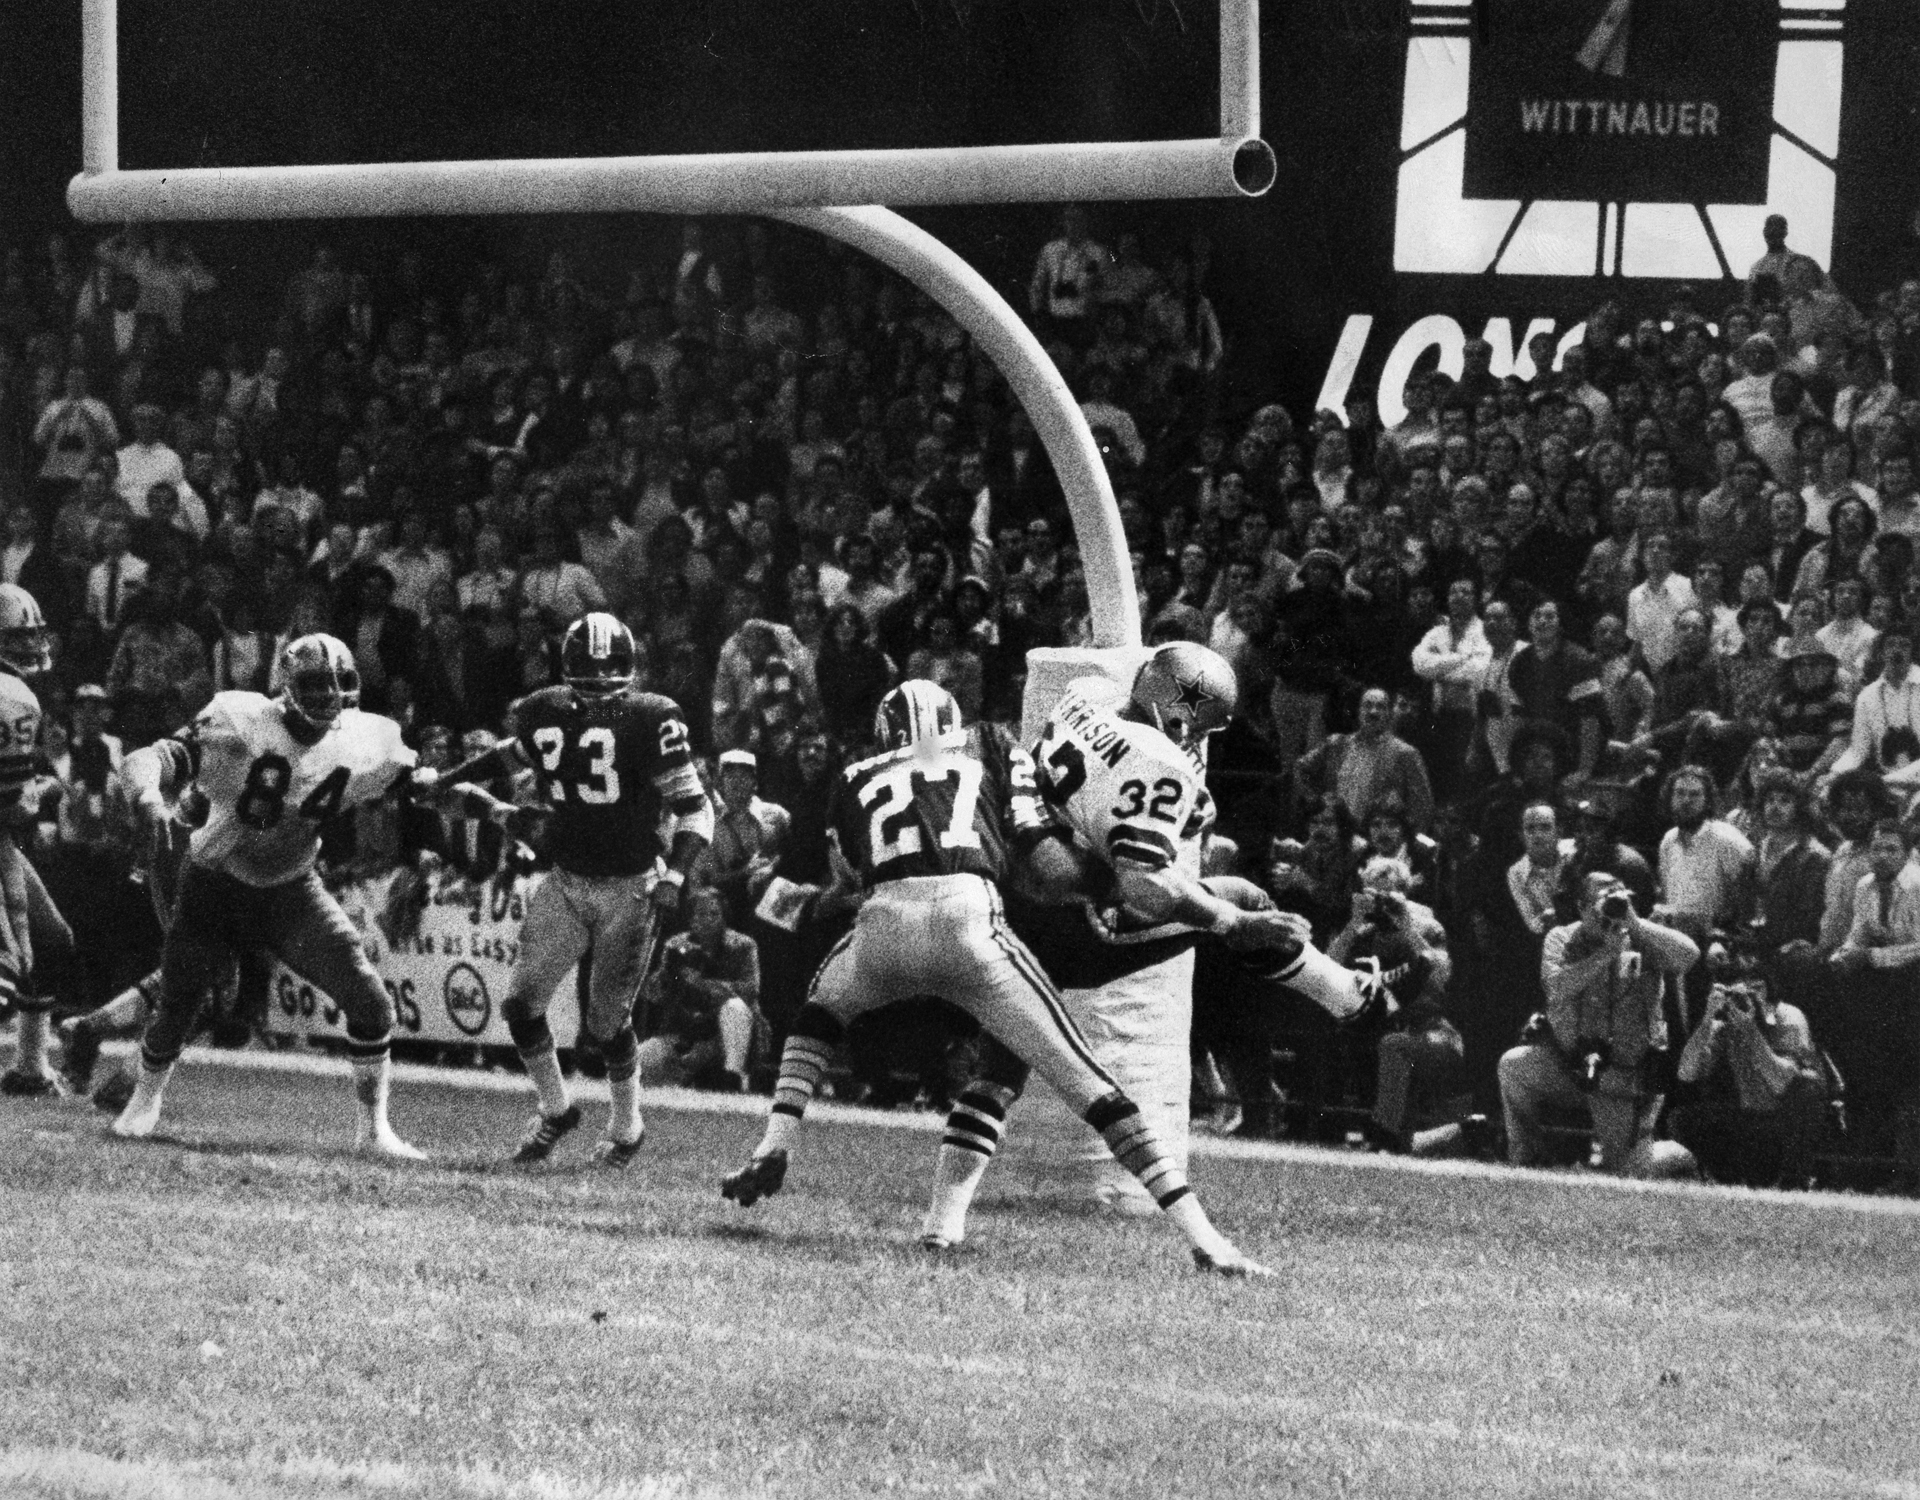 Ken Houston's tackle of Walt Garrison at the 1-yard line in the final seconds sealed a 14-7 Redskins win over the Cowboys in 1973.